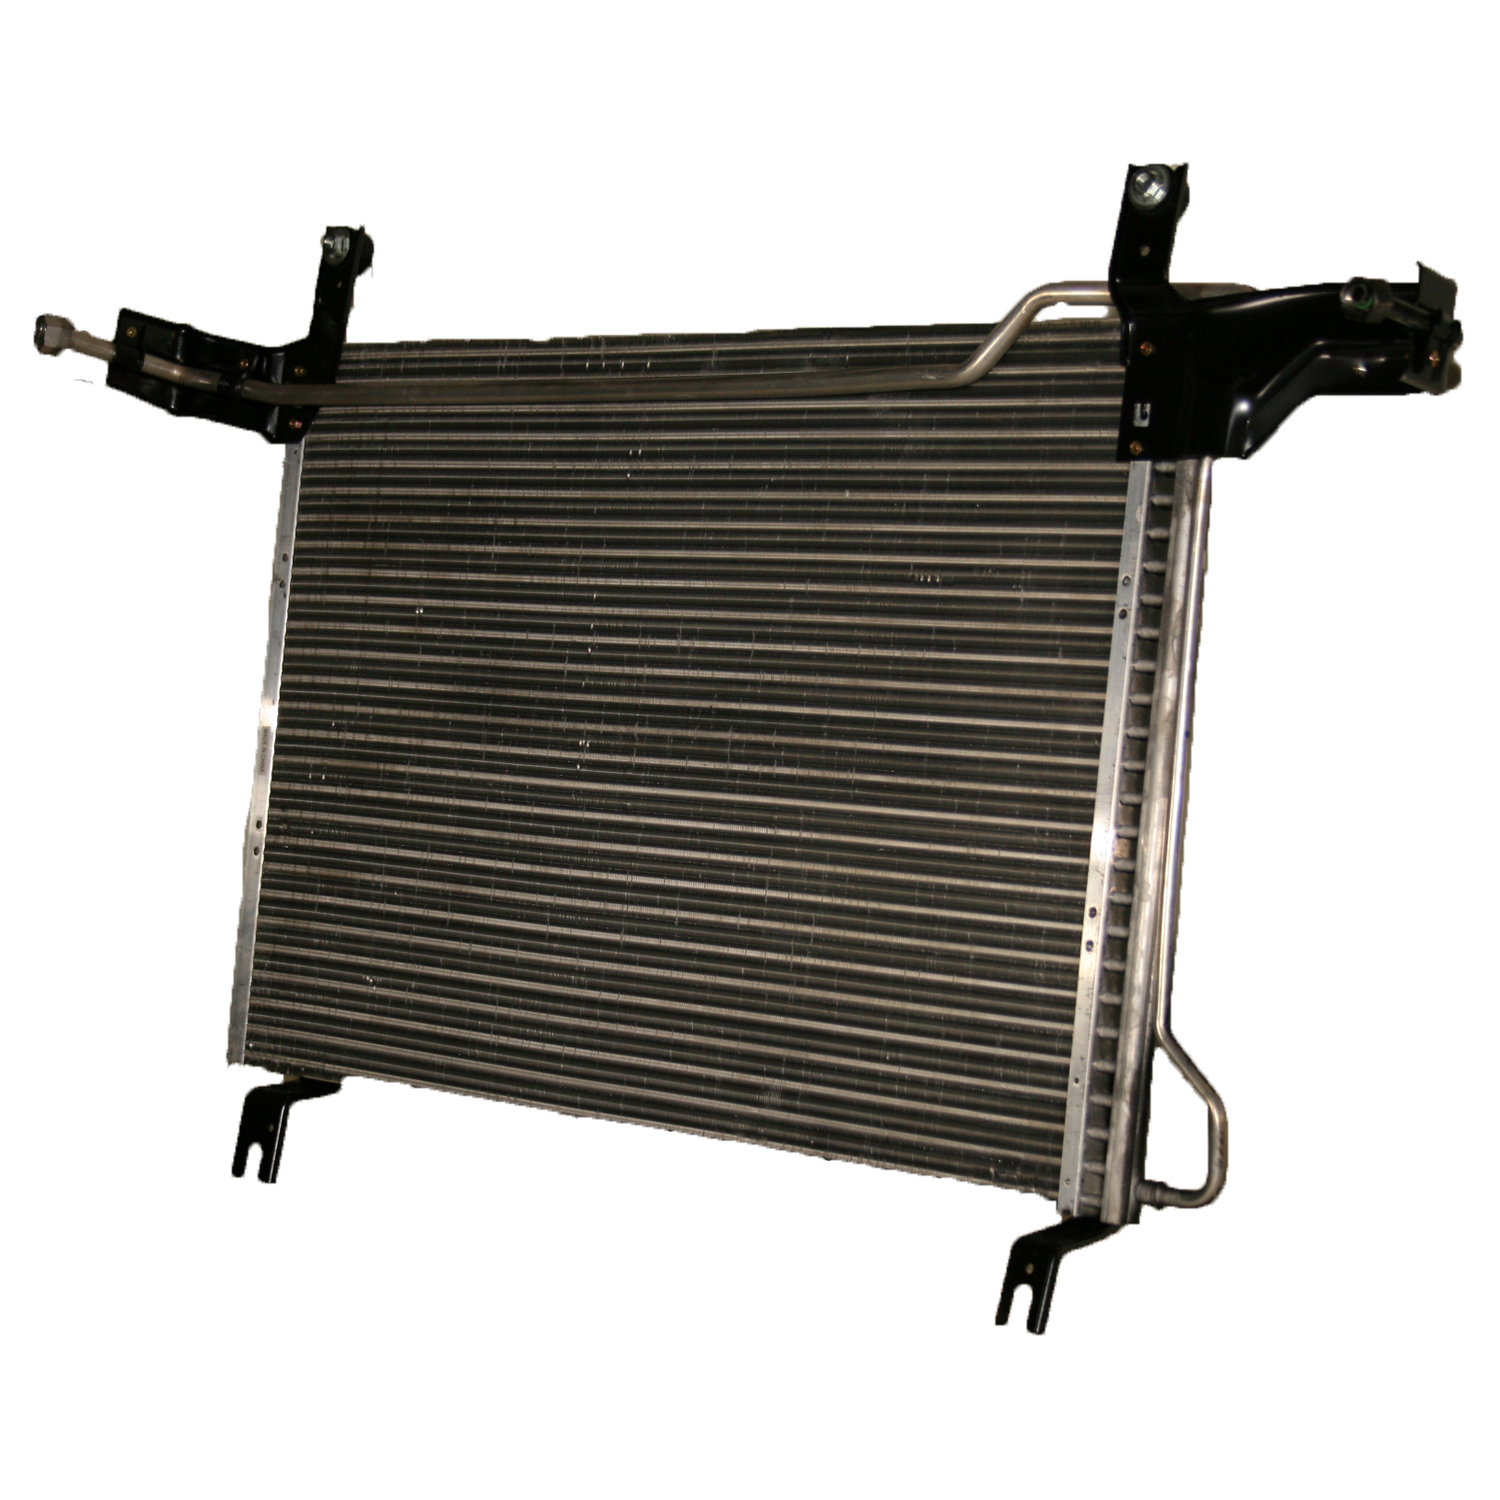 TCW Condenser 44-4531 New Product Image field_60b6a13a6e67c